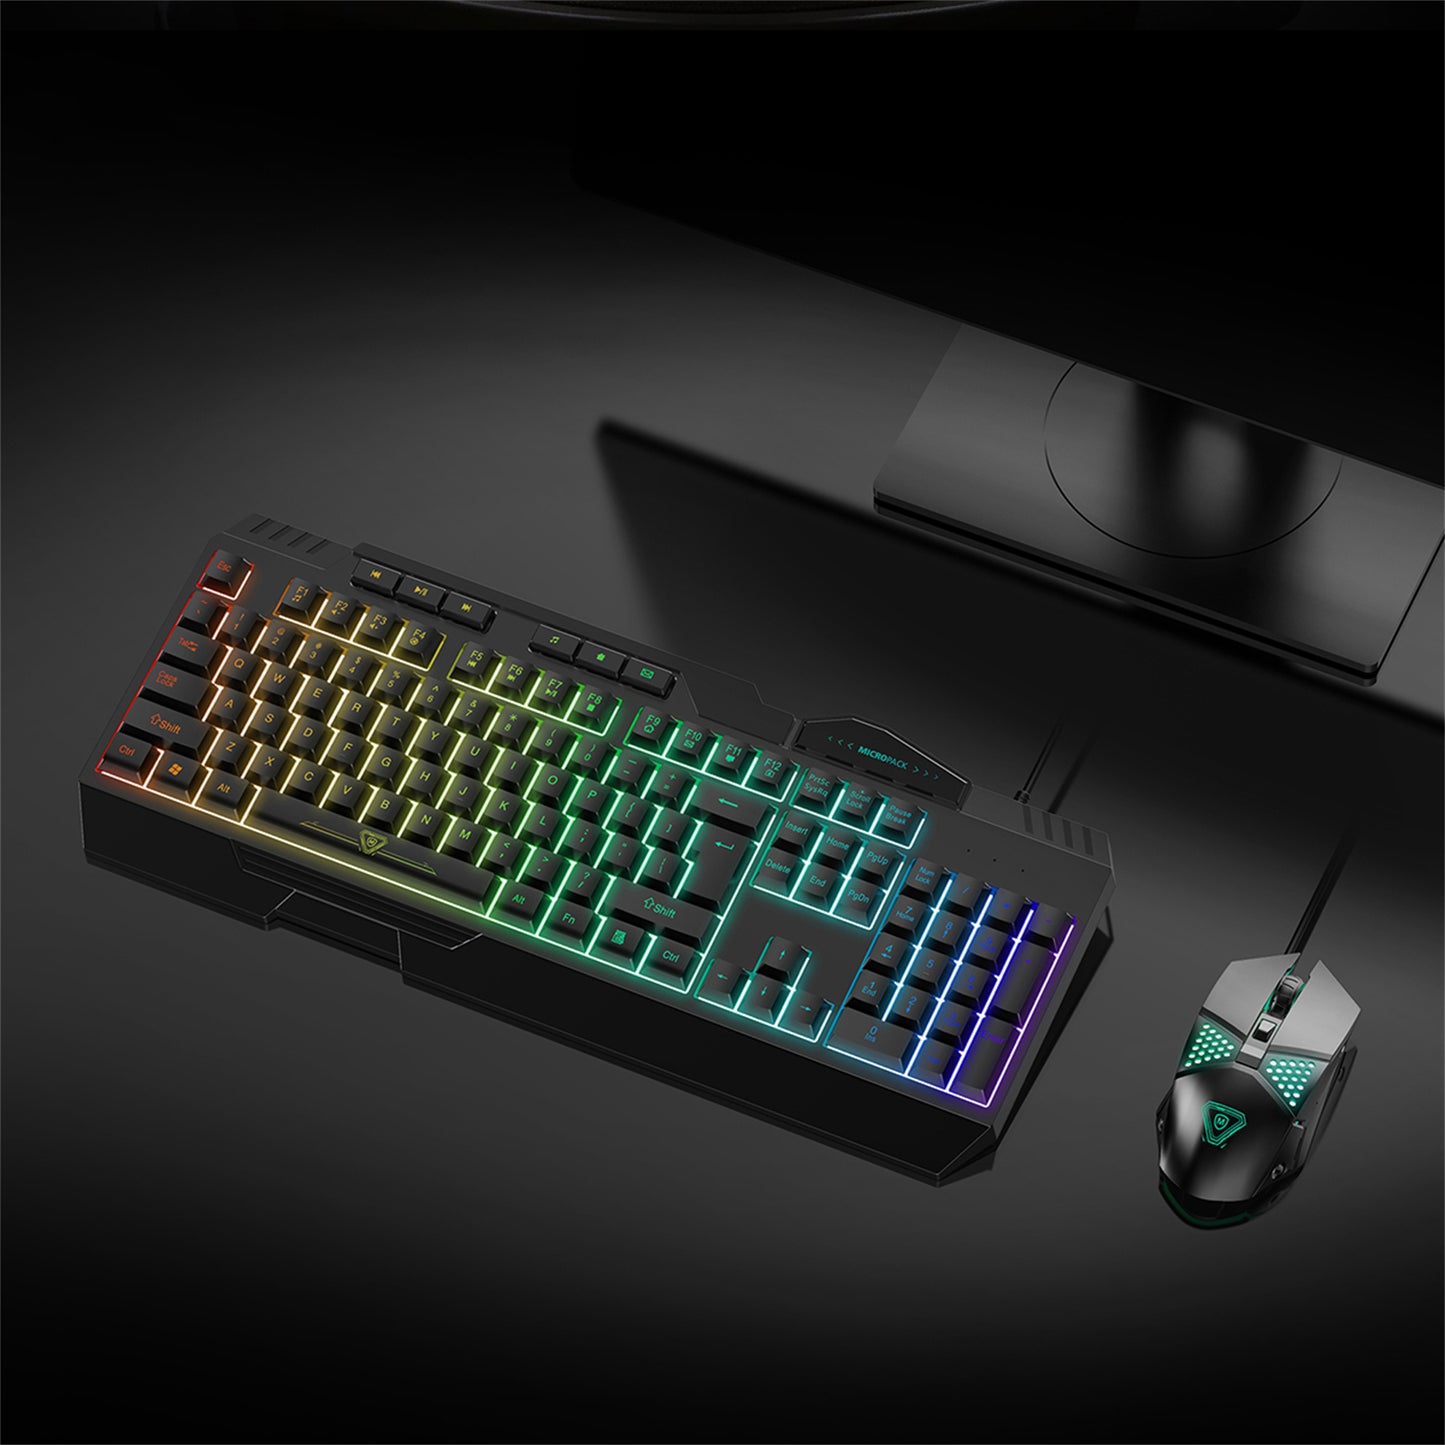 Mouse Keyboard 2 In 1 Backlight Gaming Breathing Rainbow LED Combo for PC Laptop